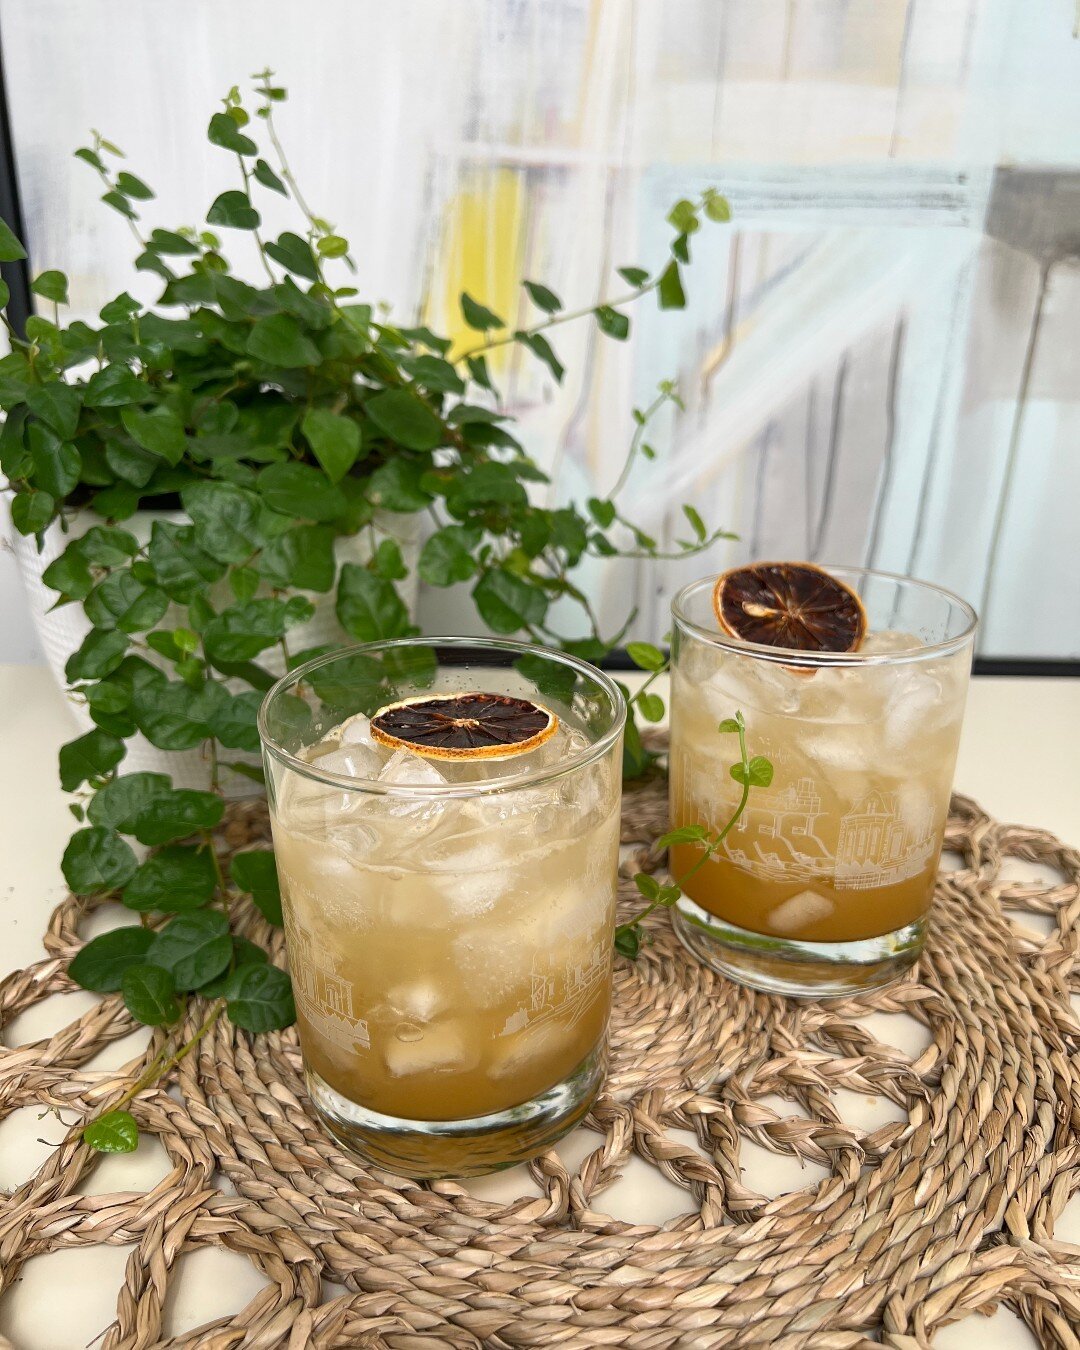 The Clementine Smash!

1 Cutie
2-3 Sprigs of Thyme
3/4 oz Lemon Juice
1/2 oz Honey Syrup
2 oz Vodka, Gin or Bourbon

Muddle in a cocktail shaker, add ice, and shake. Double strain into a glass filled with ice. Top with your favorite soda water. Garni